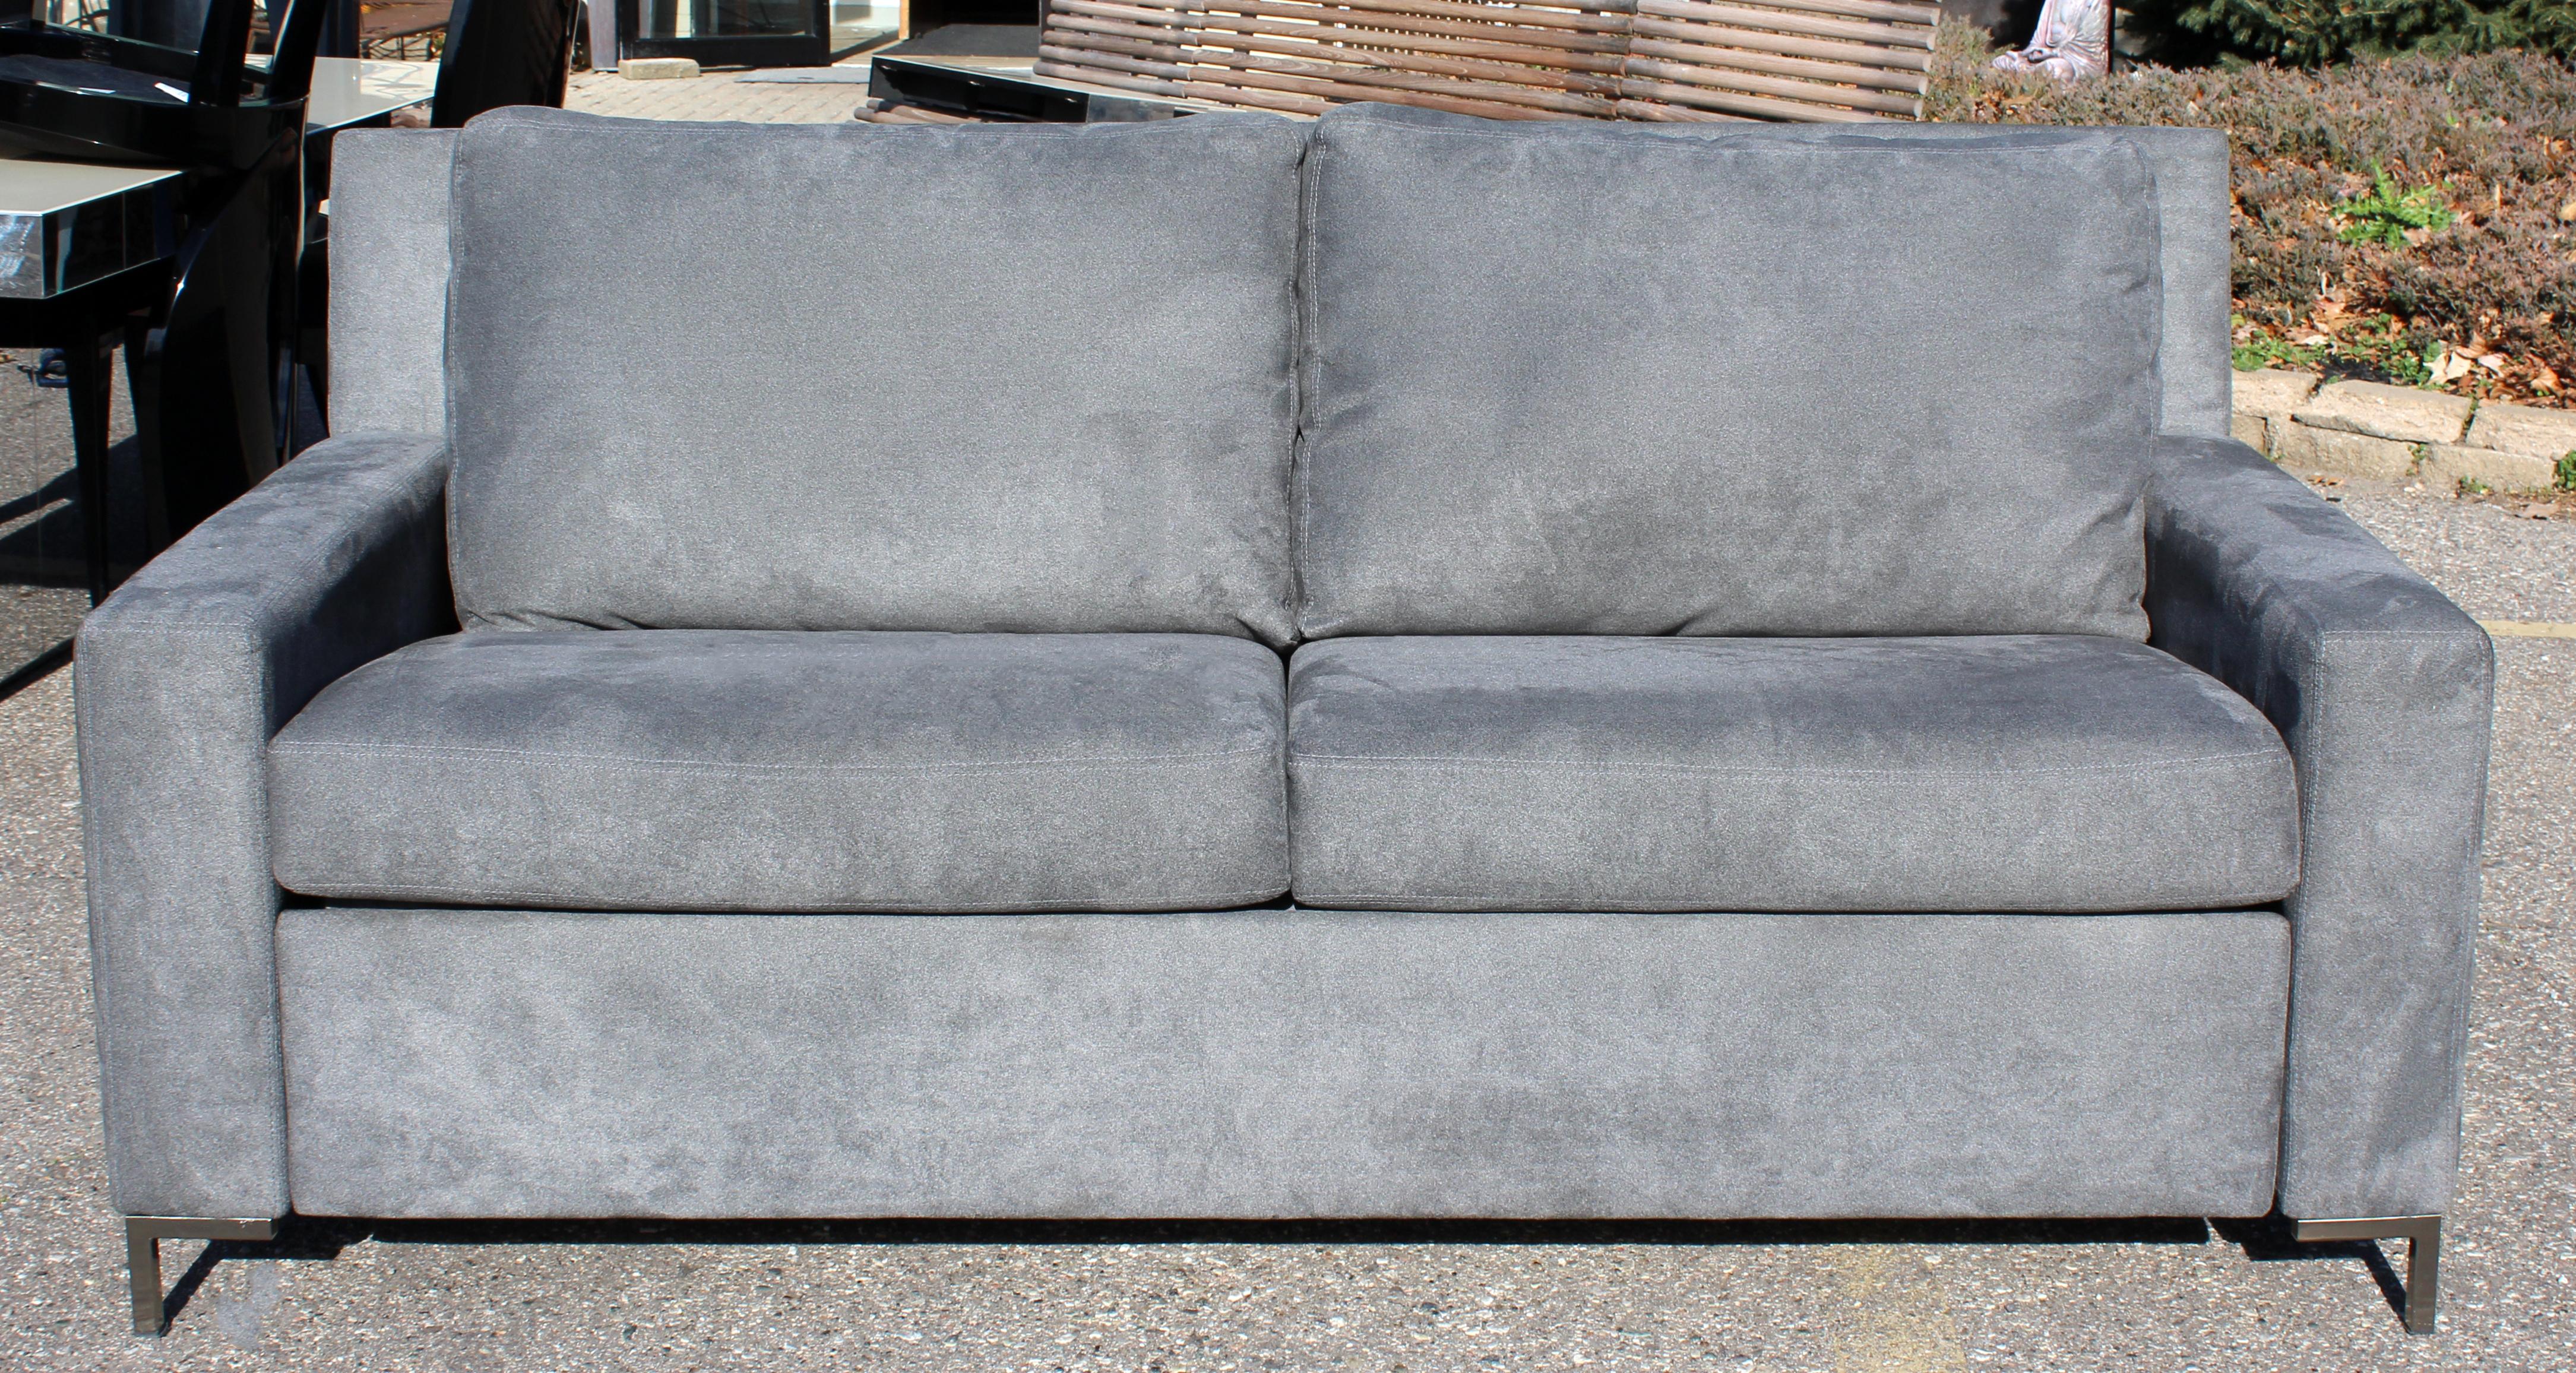 For your consideration is a plush, gray, convertible sleeper sofa by American Leather Co. Sleeper sofa with deluxe mattress. In excellent condition. The dimensions are 74